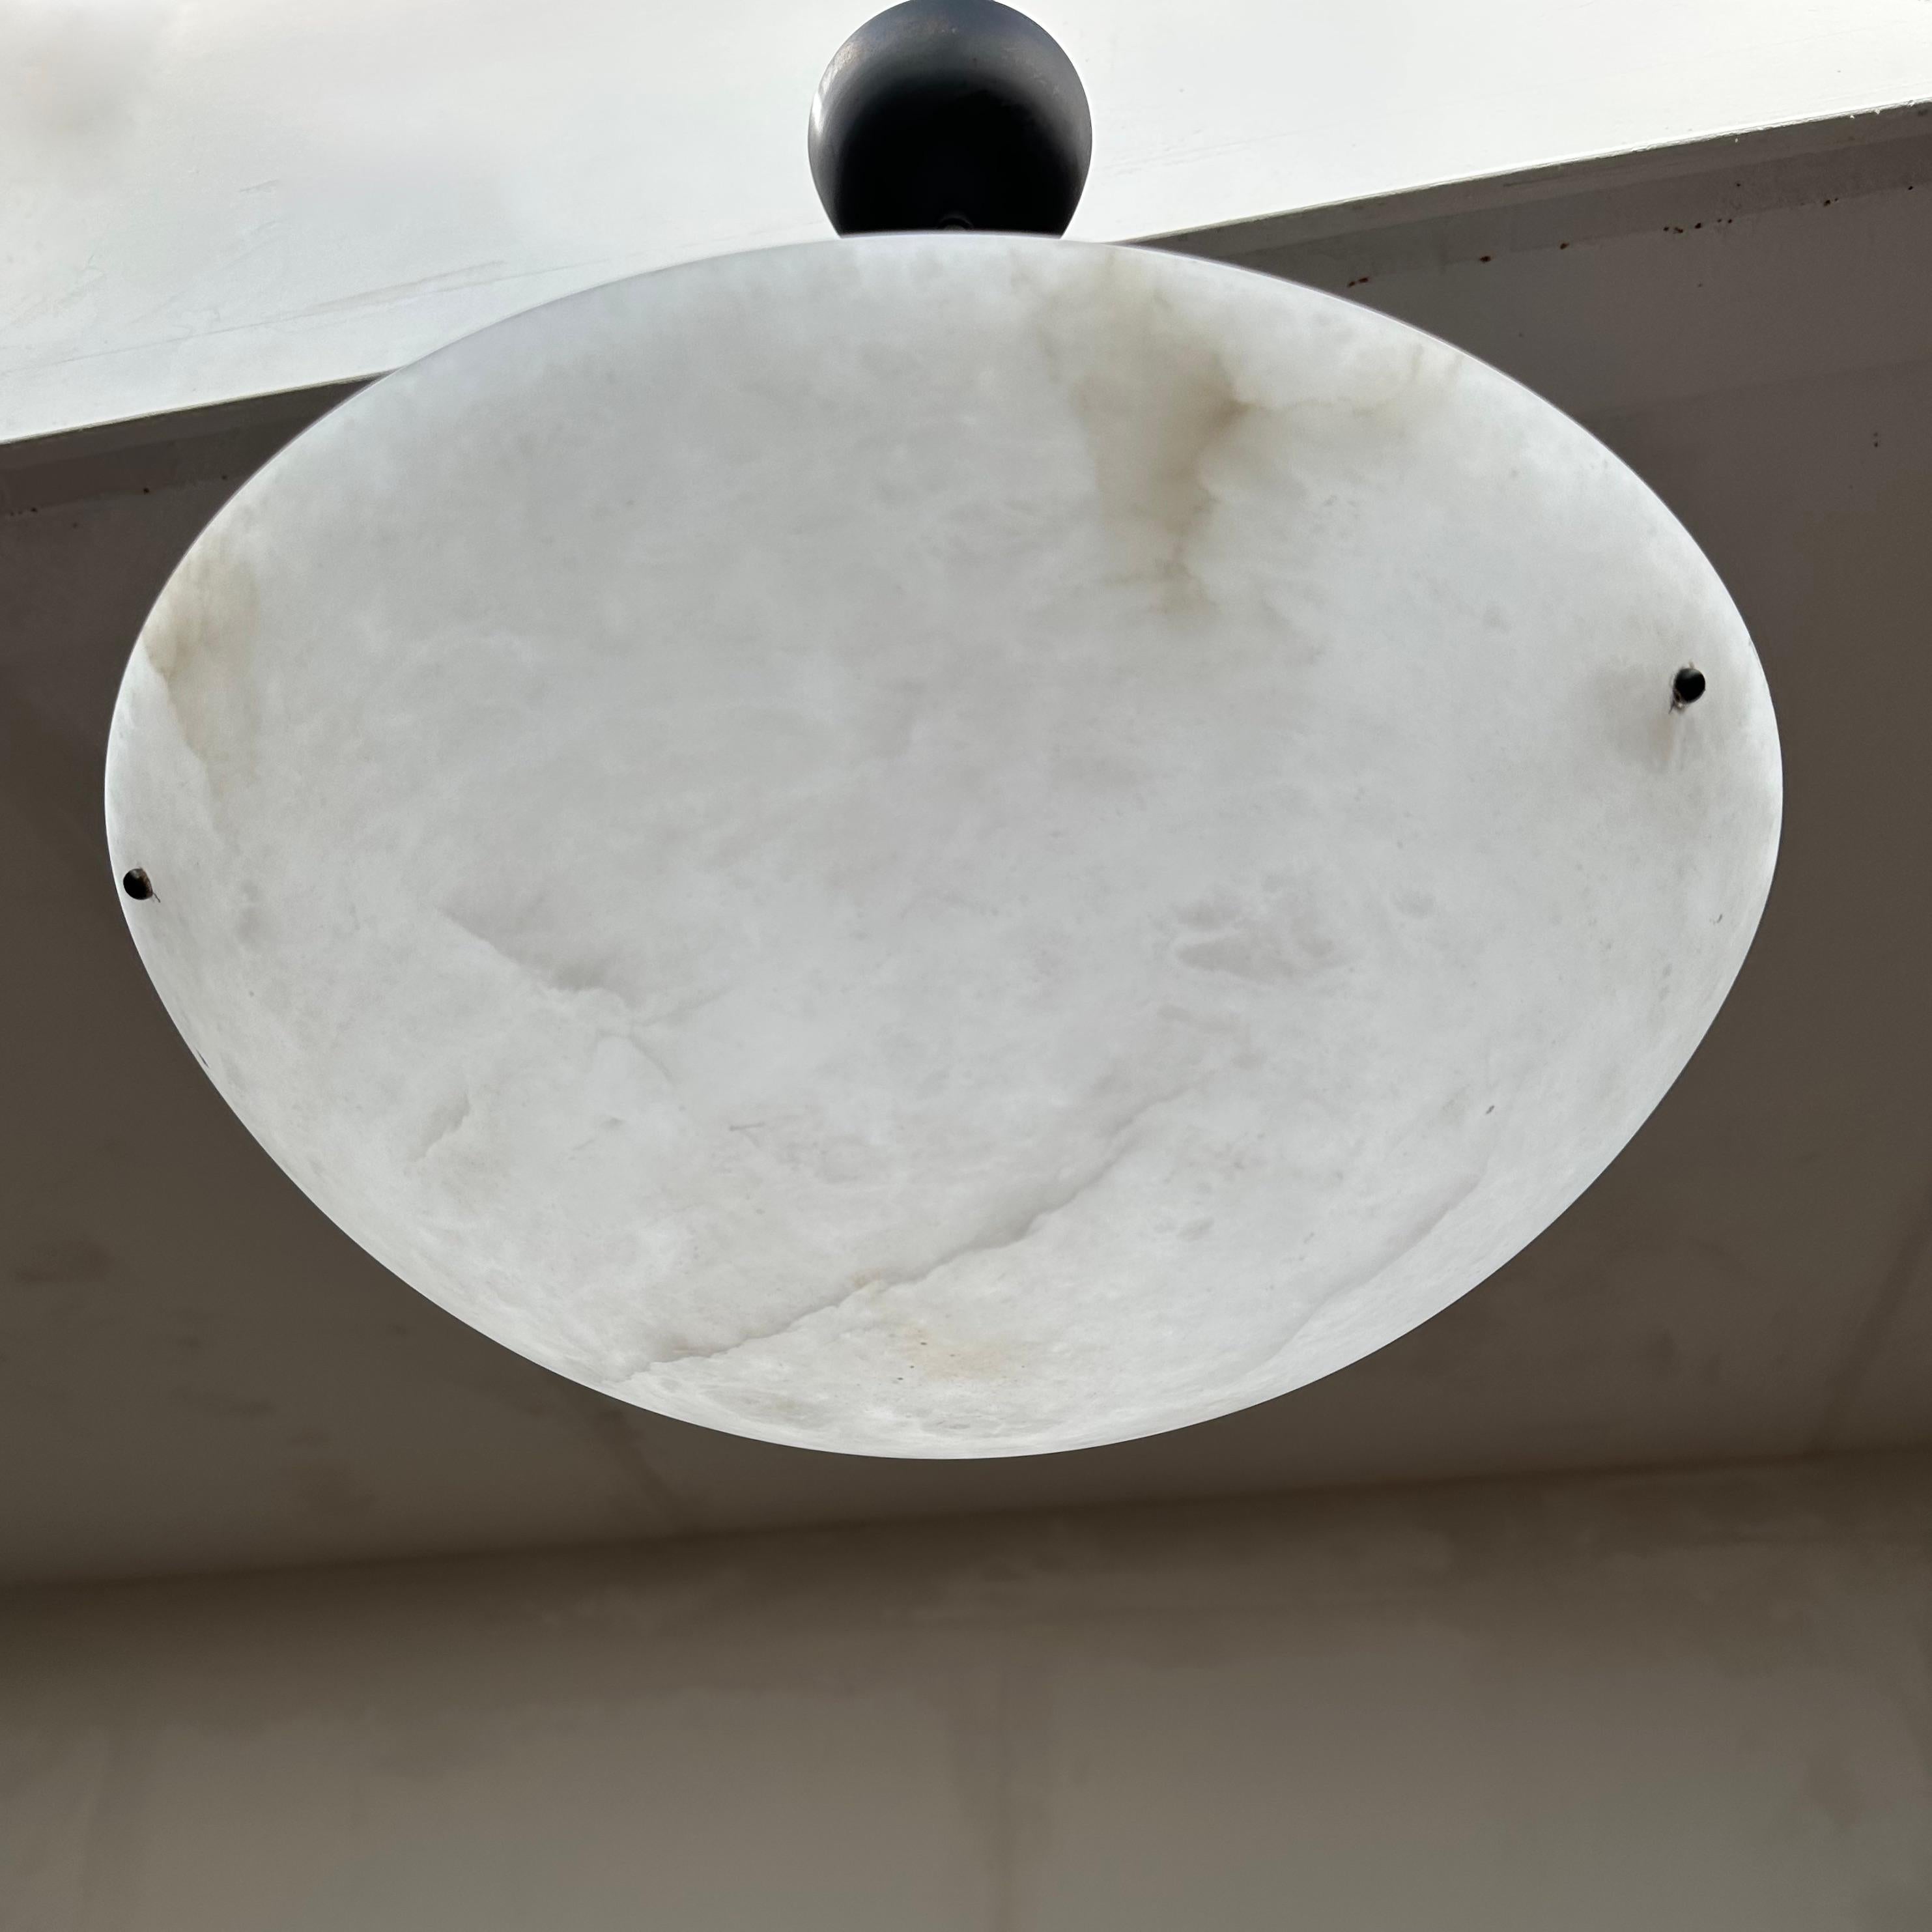 Stylish and pure white alabaster pendant light.

This rare and good size alabaster light fixture also is of a beautiful design. The clean and perfectly polished surface of this alabaster shade comes with lunar like patterns which makes this timeless